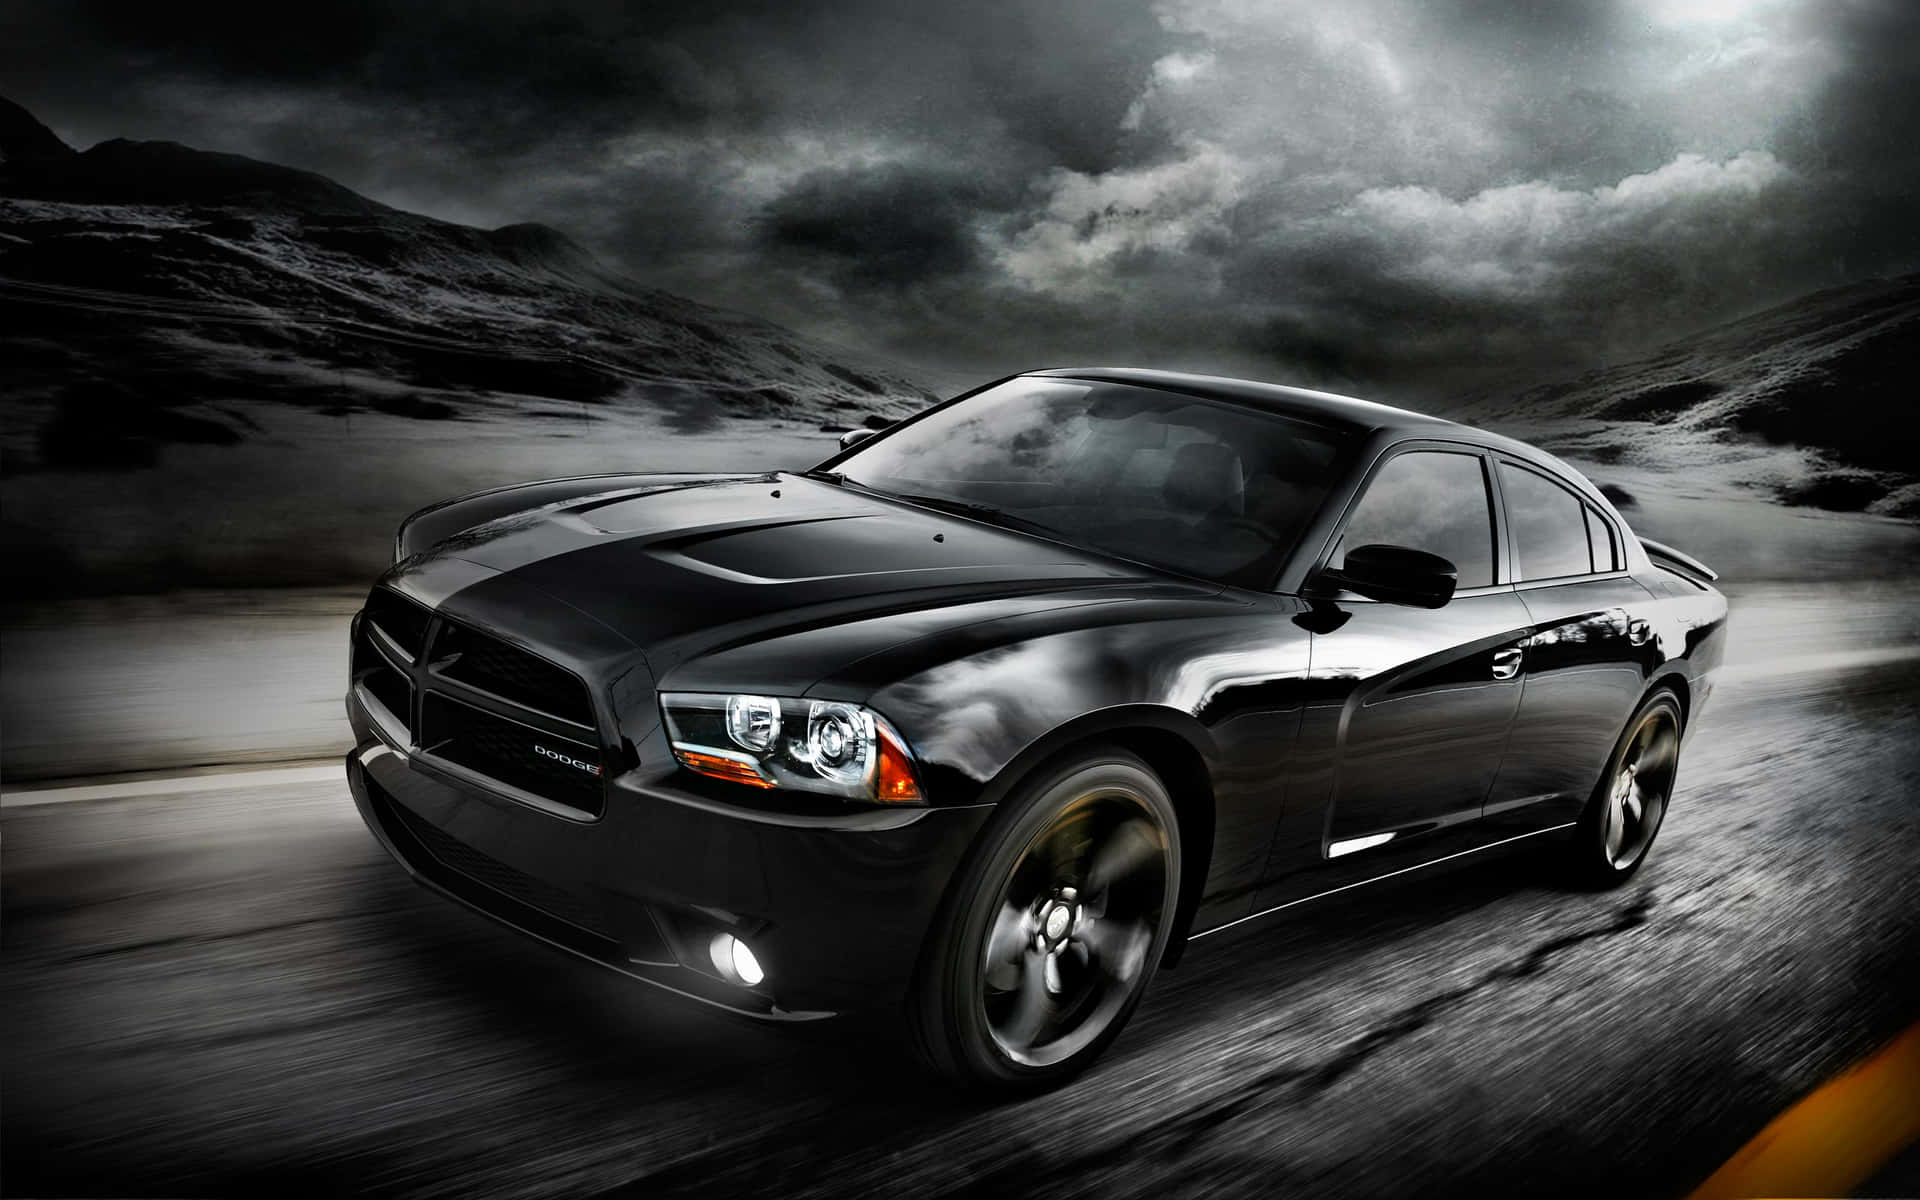 Powerful Dodge Charger on the Road Wallpaper